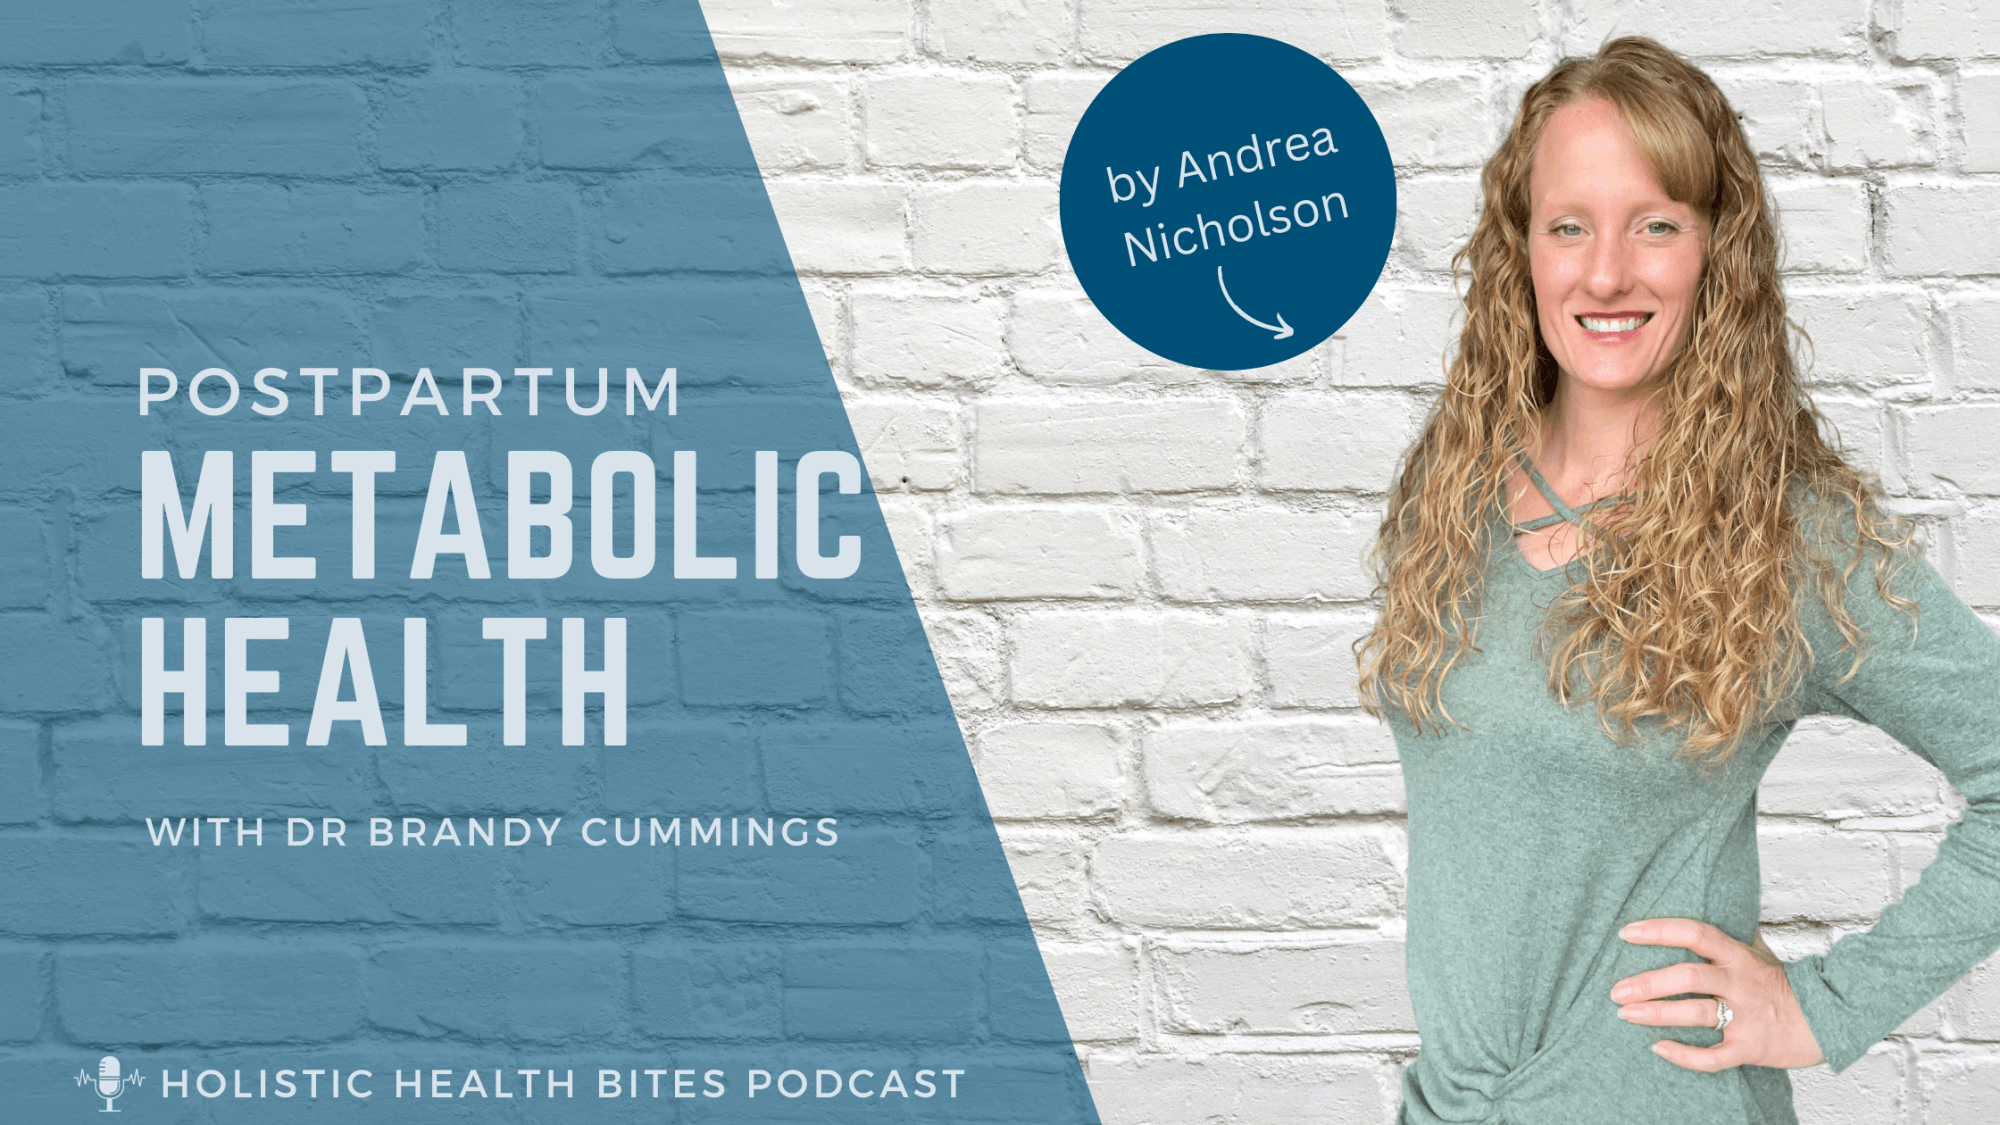 Postpartum metabolic health with Dr Brandy Cummings by Functional Nutritionist Andrea Nicholson on the Holistic Health Bites podcast